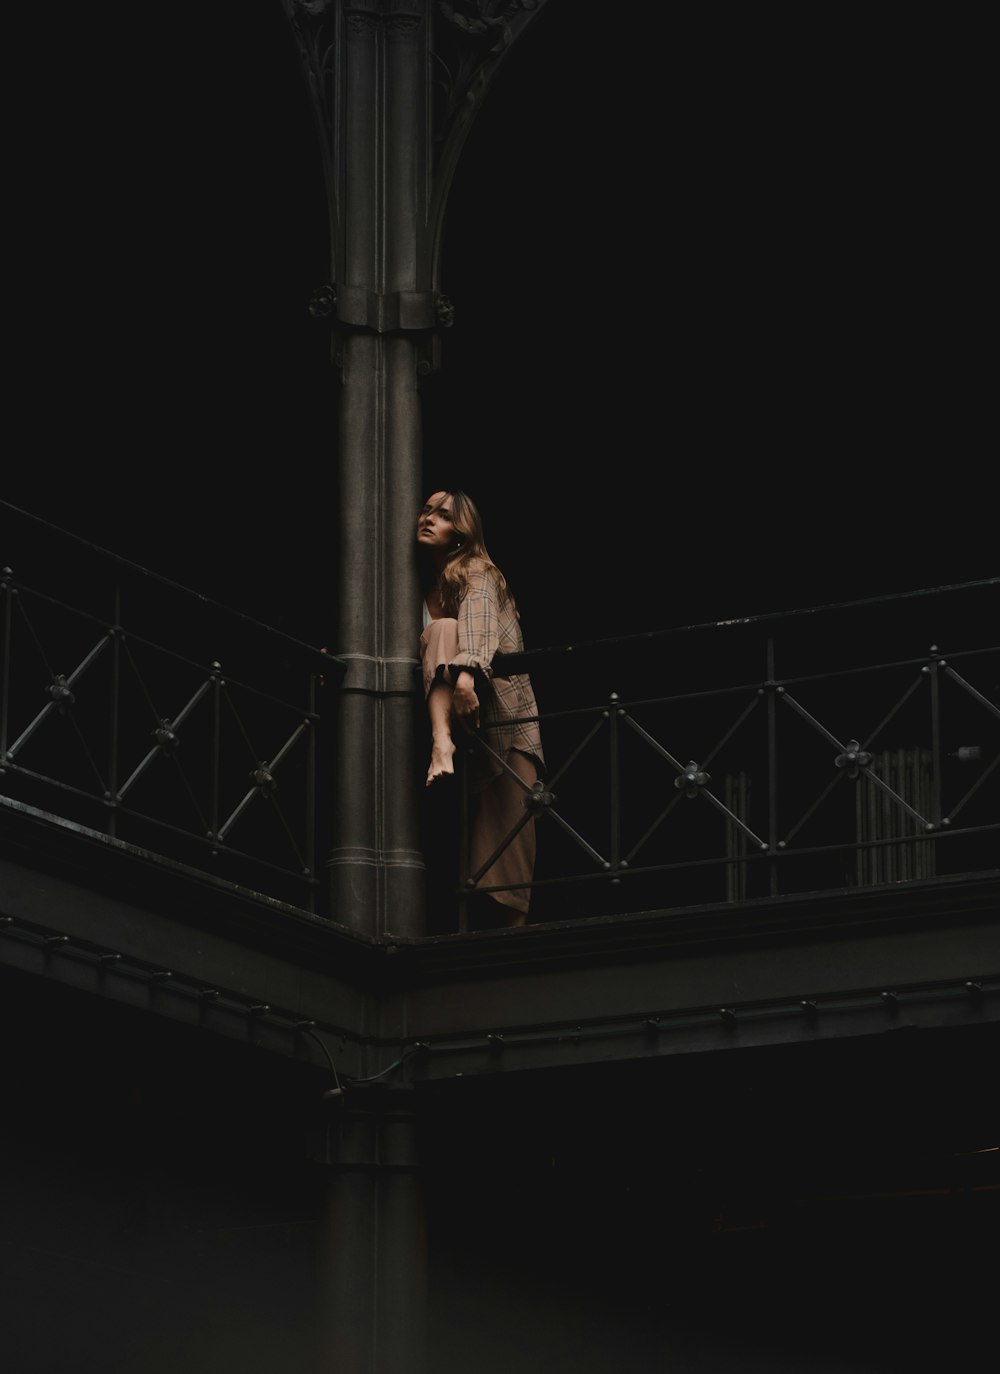 a person standing on a bridge